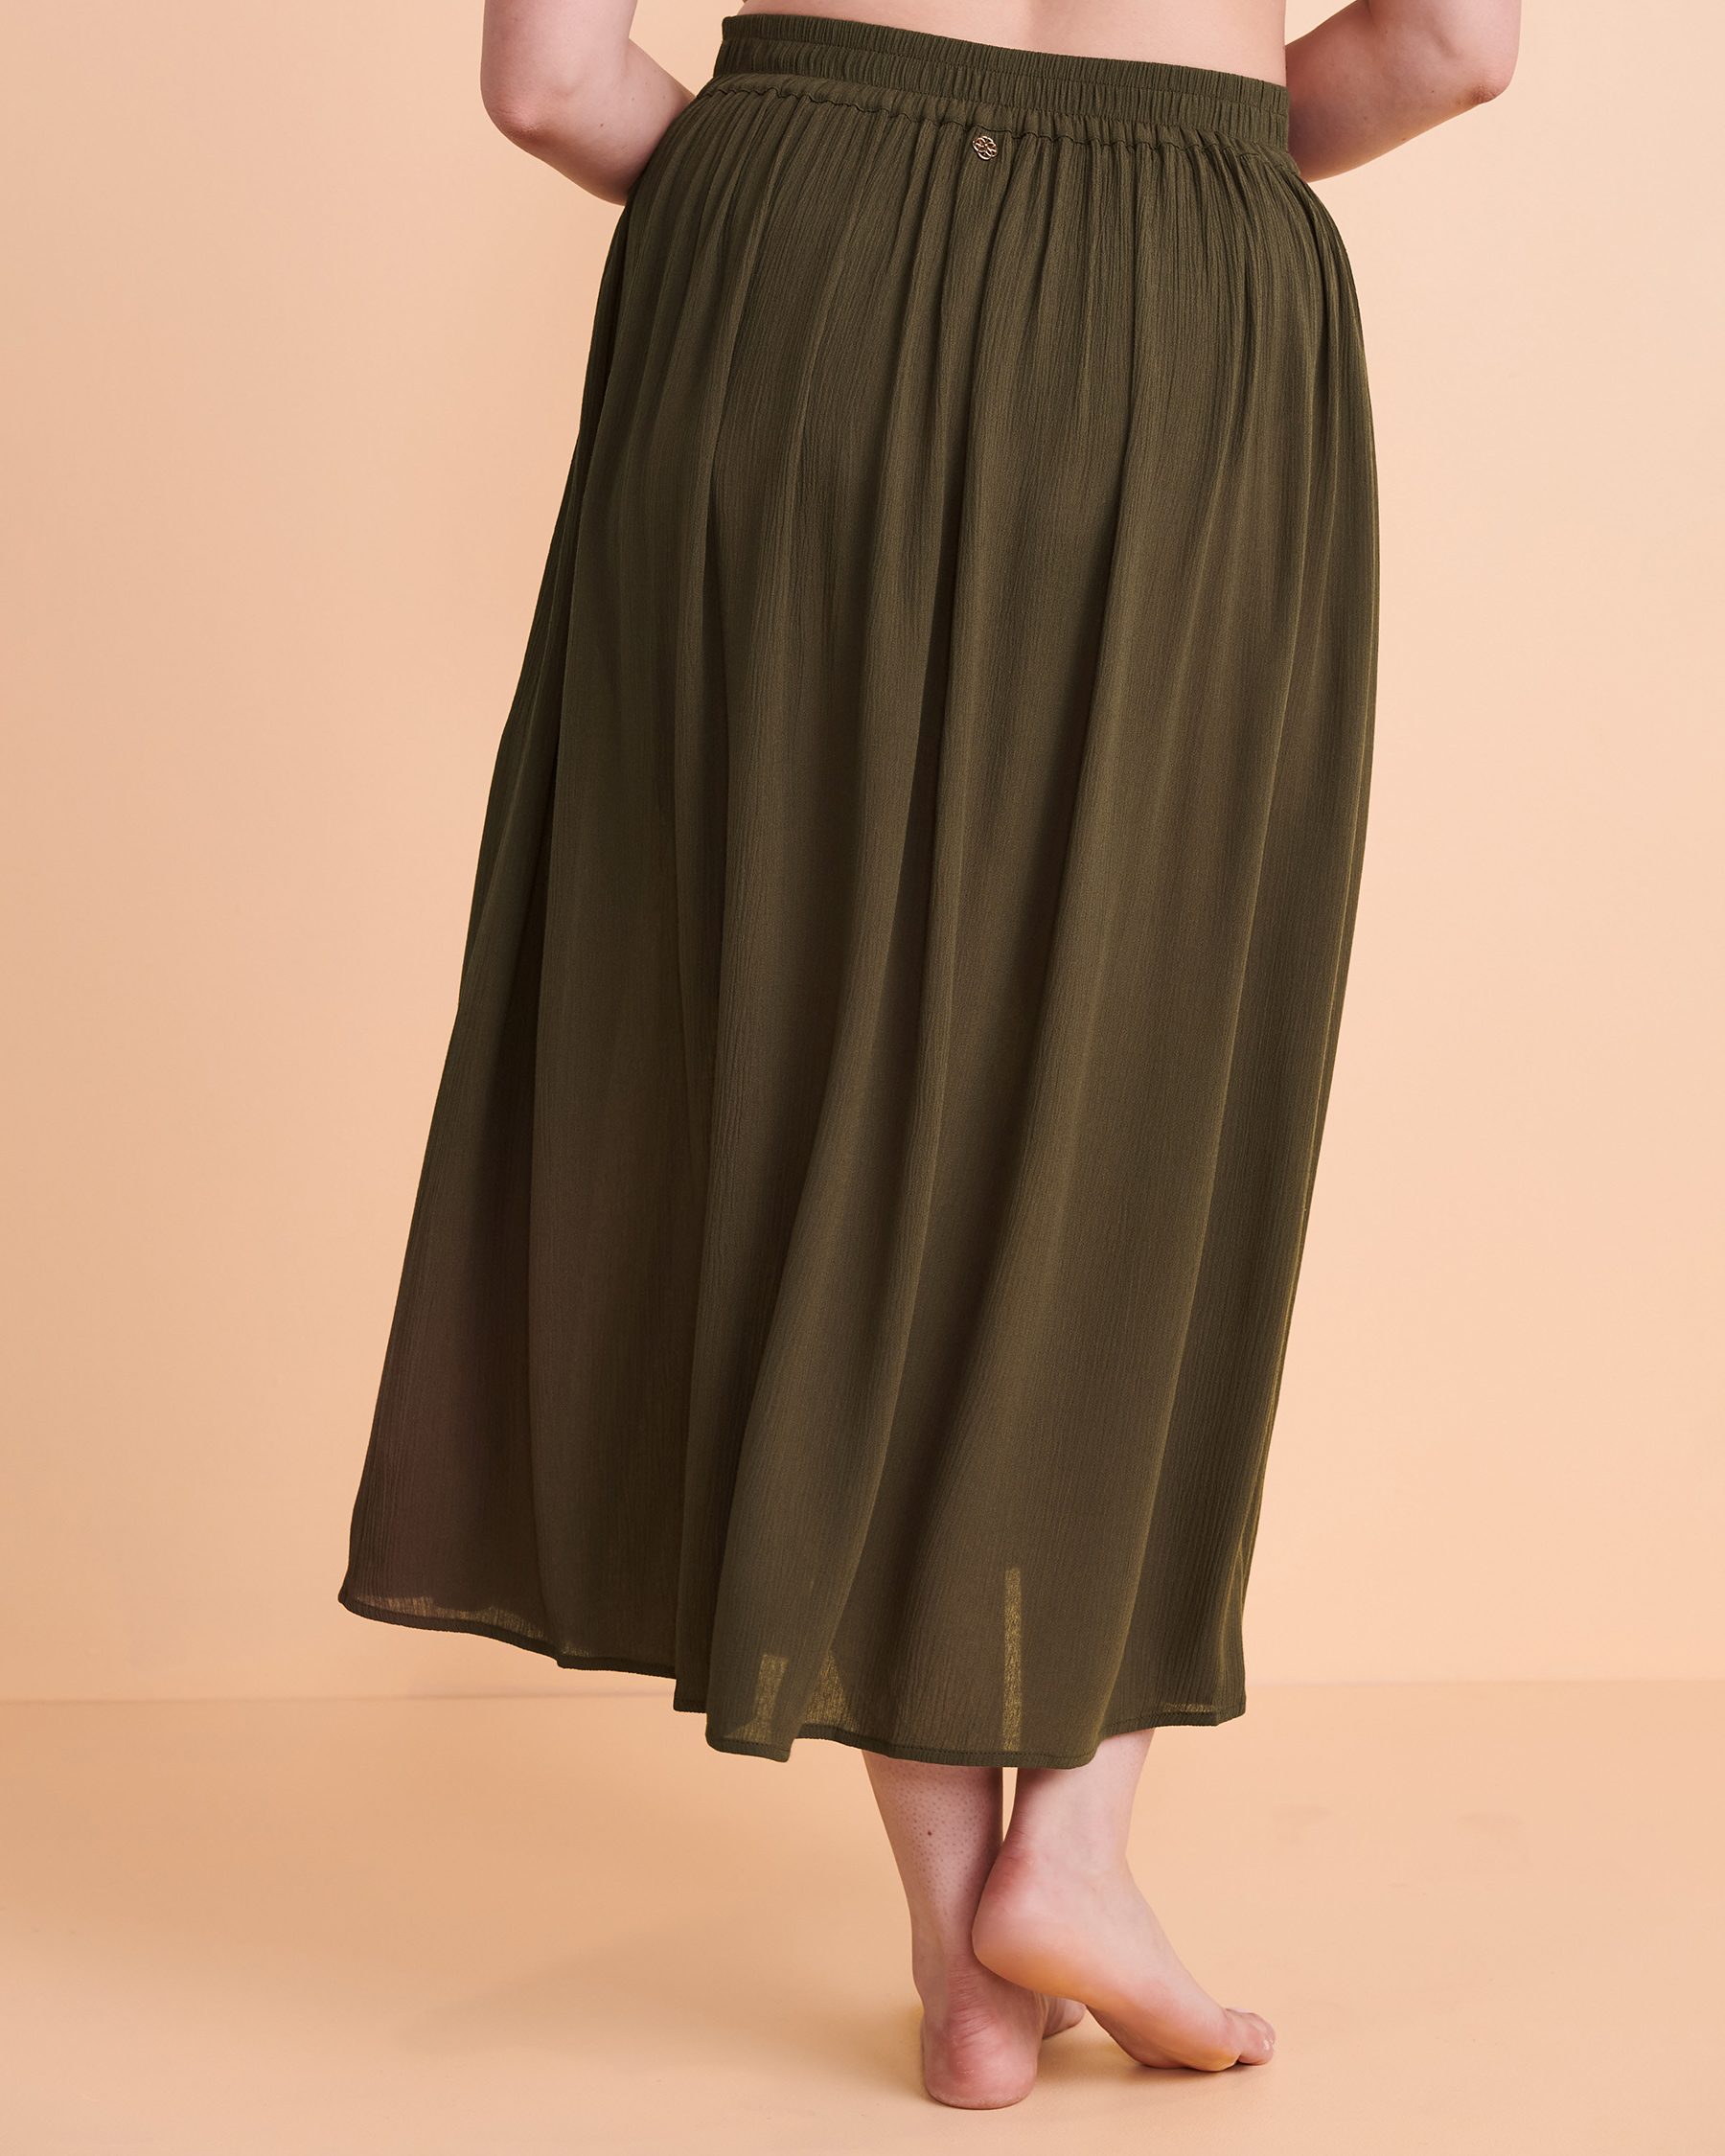 TURQUOISE COUTURE Buttoned Long Skirt Olive 02200032 - View4